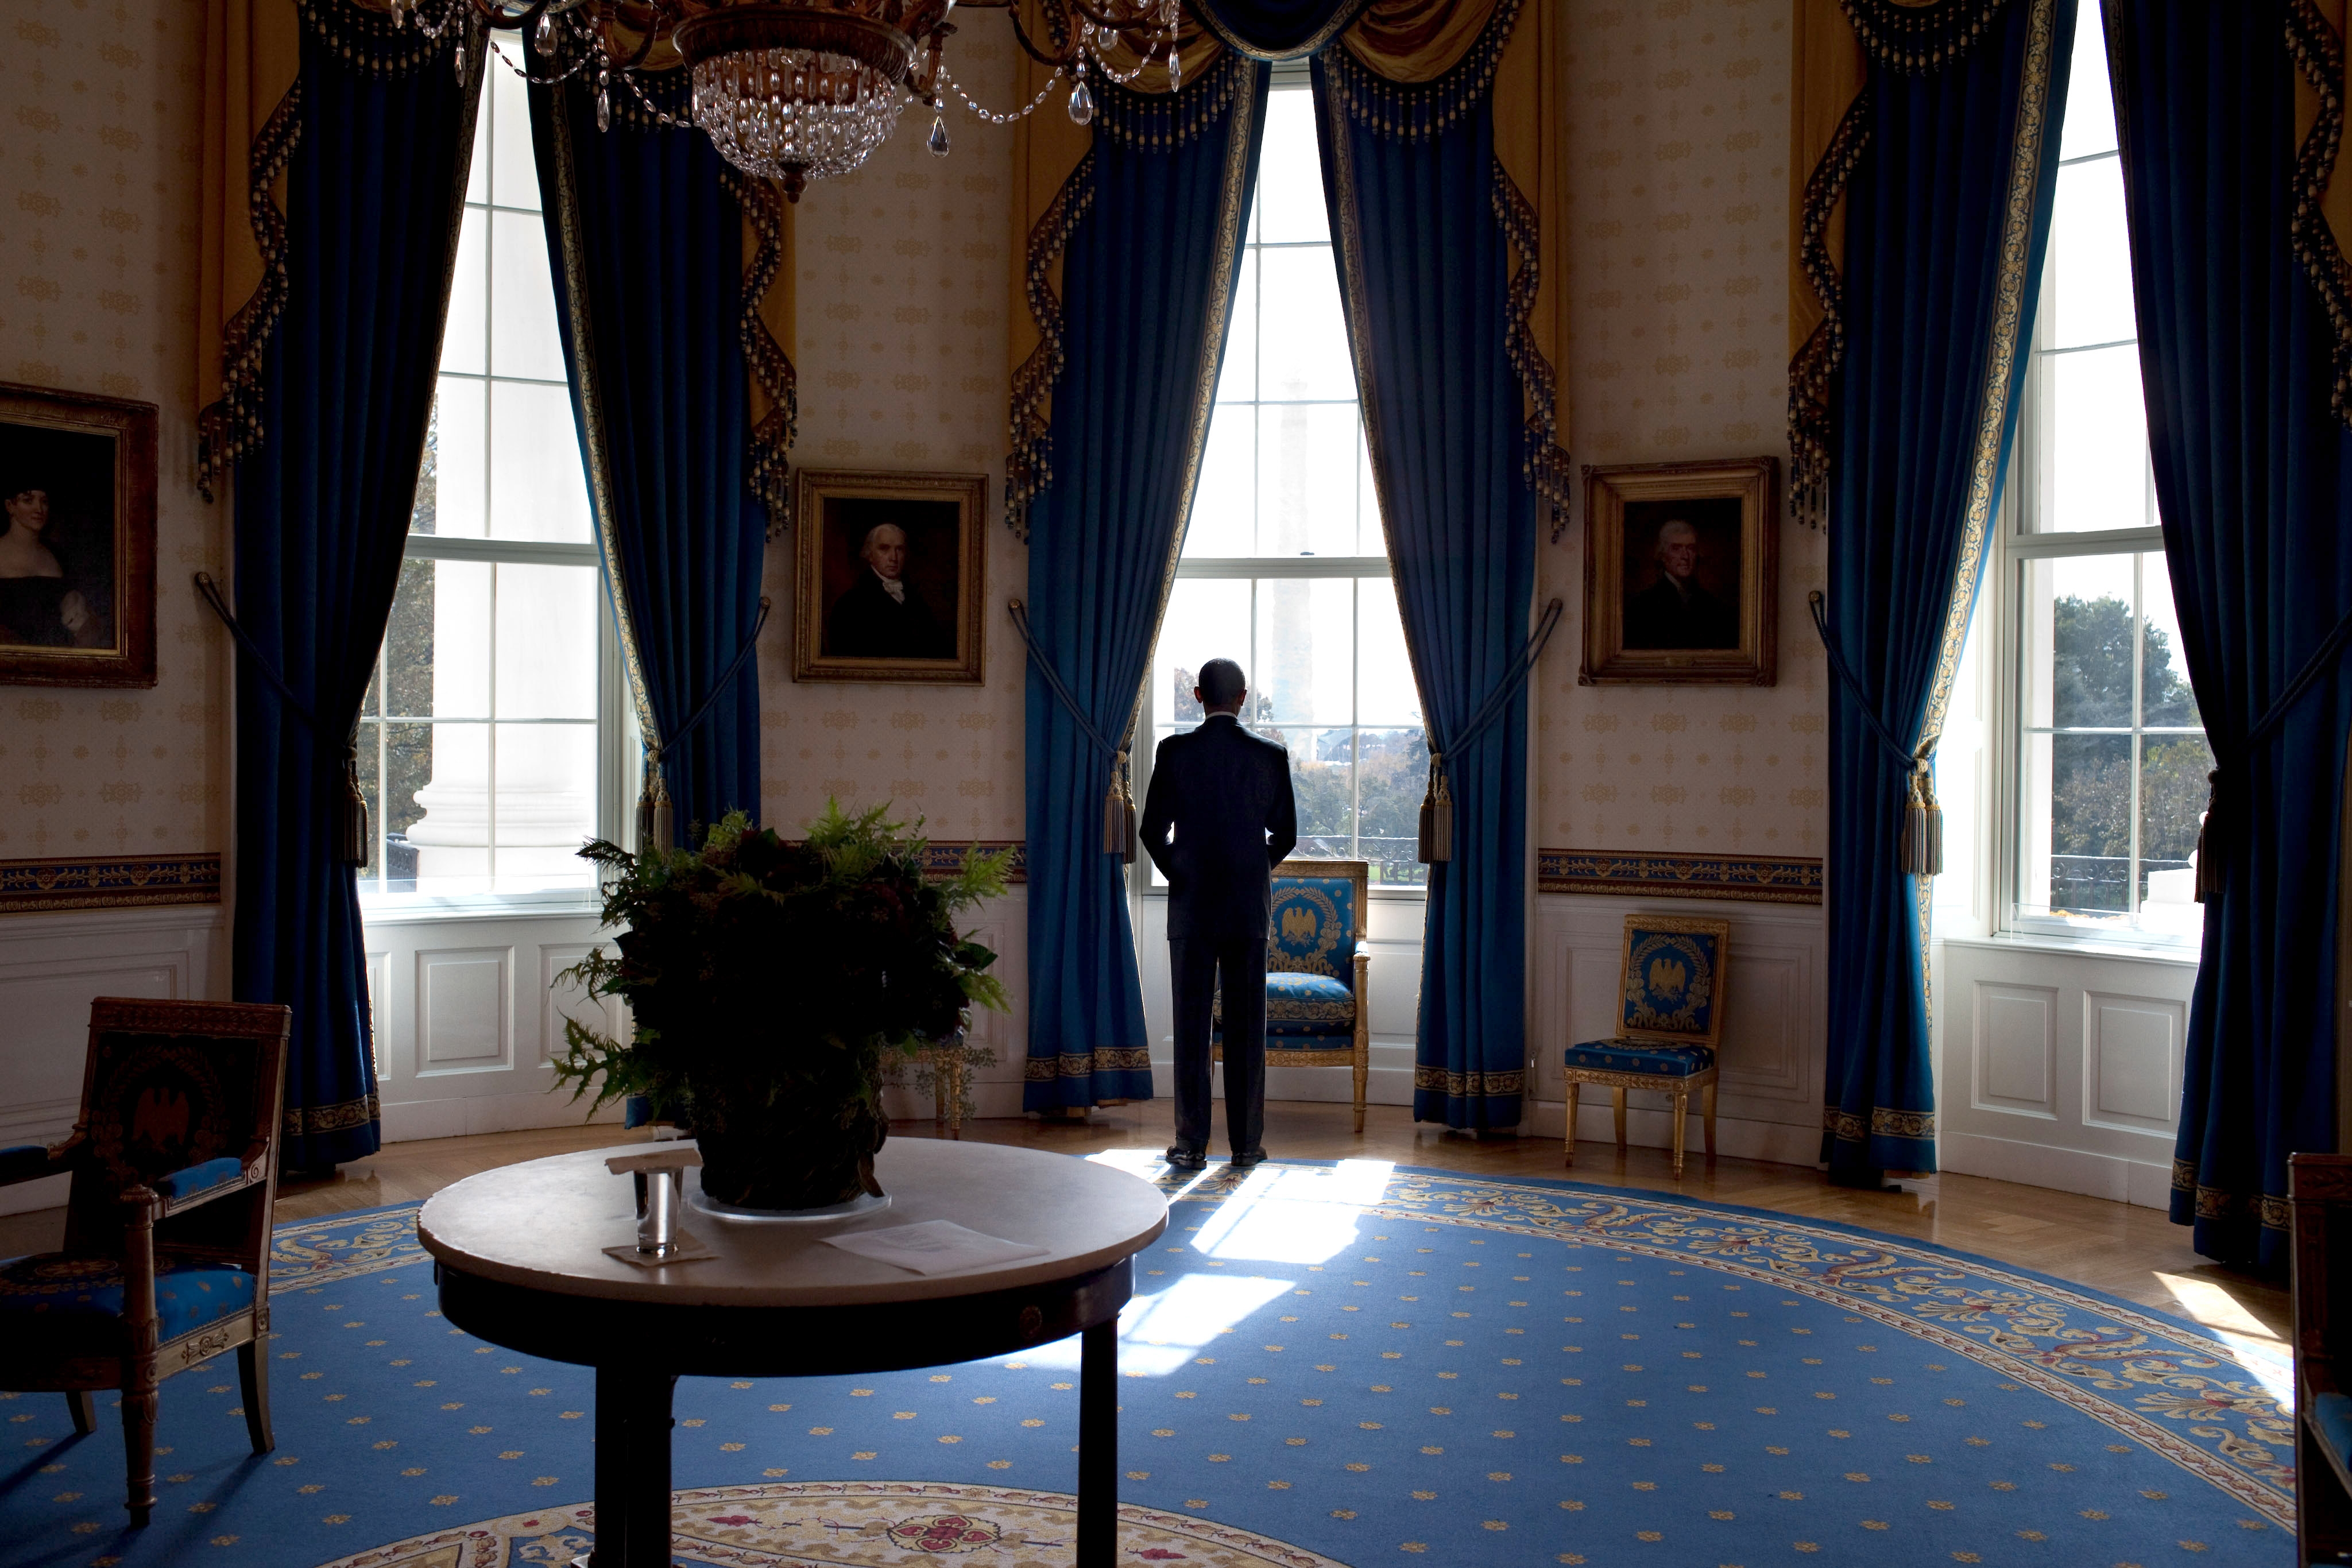 President Barack Obama looks out the window in the Blue Room of the White House before holding a press conference in 2010. (Official White House Photo by Pete Souza)